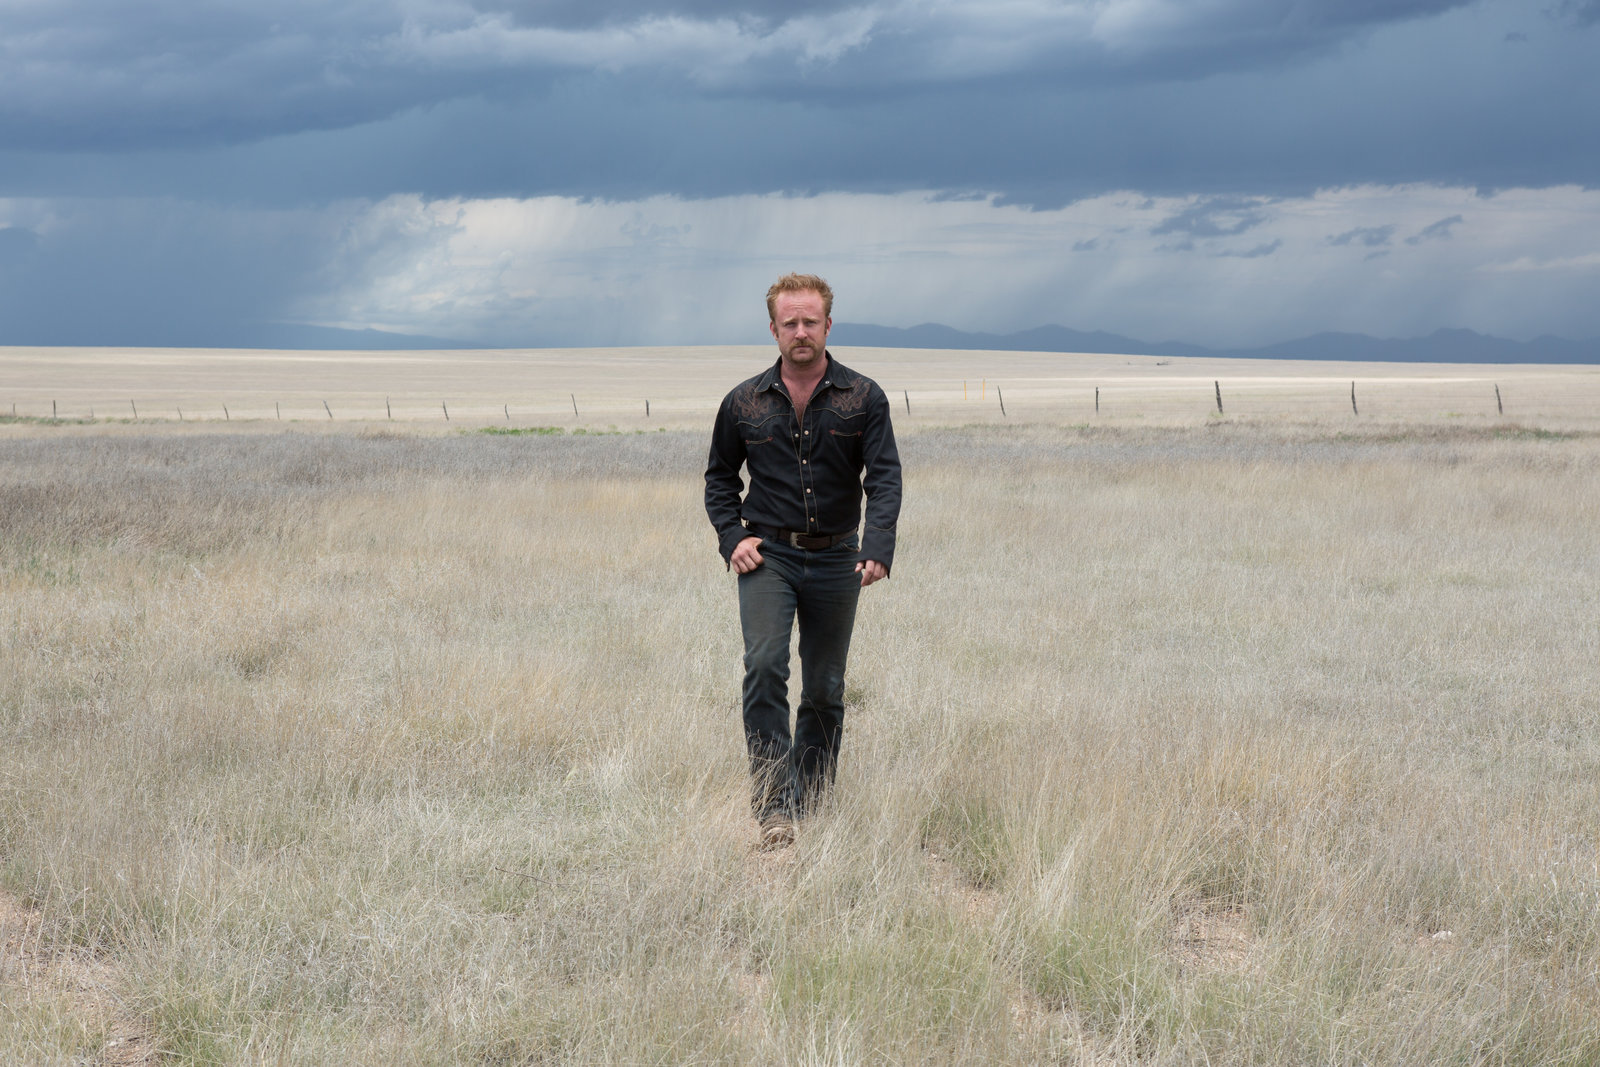 Hell or High Water (blu-ray)